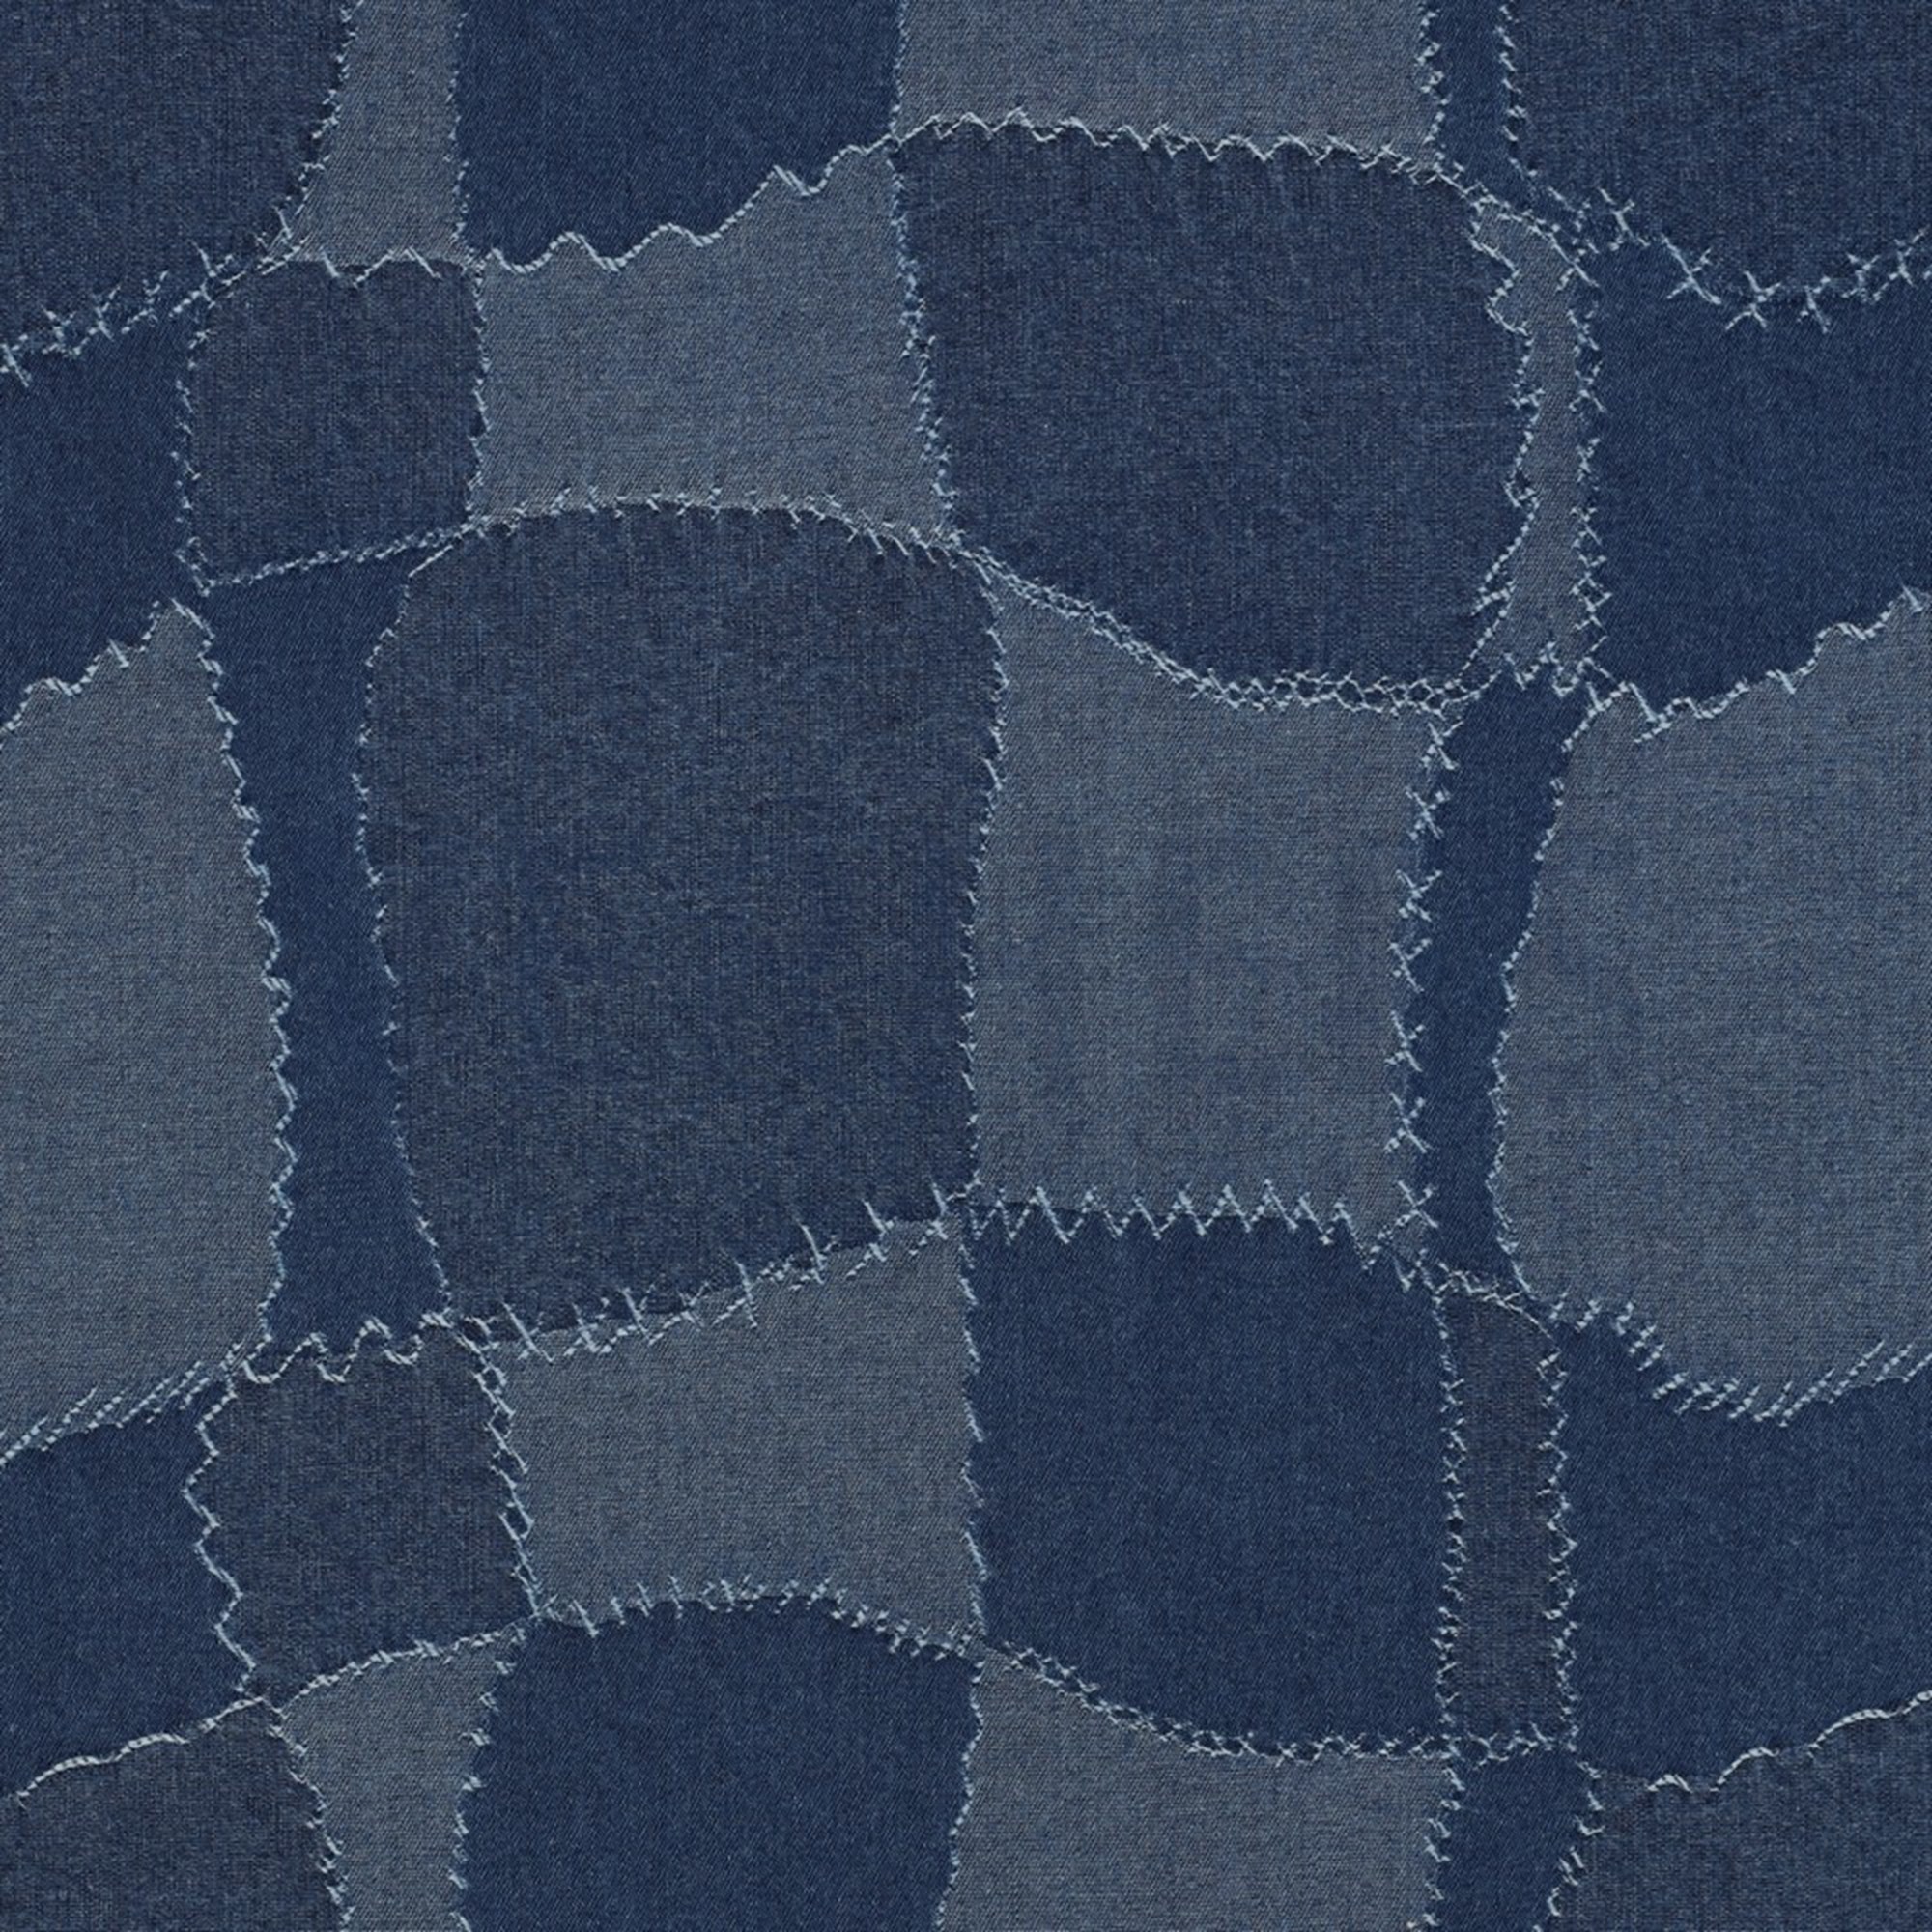 JEANS JACQUARD PATCHWORK JEANS (high resolution)